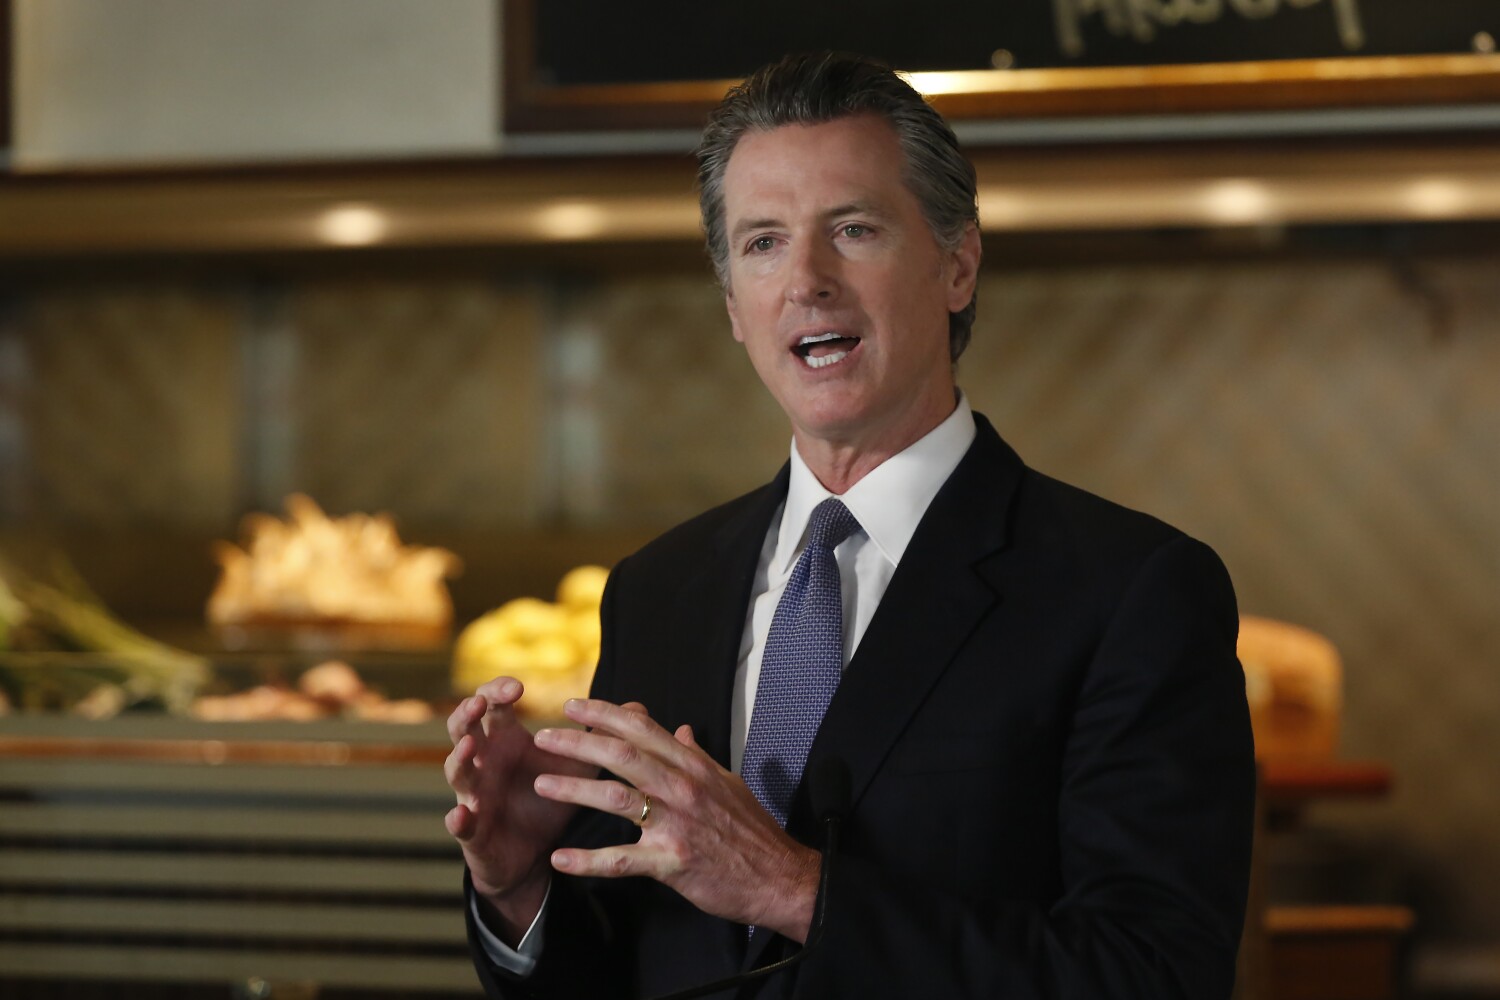 Newsom defends California reopening rules even as coronavirus cases rise